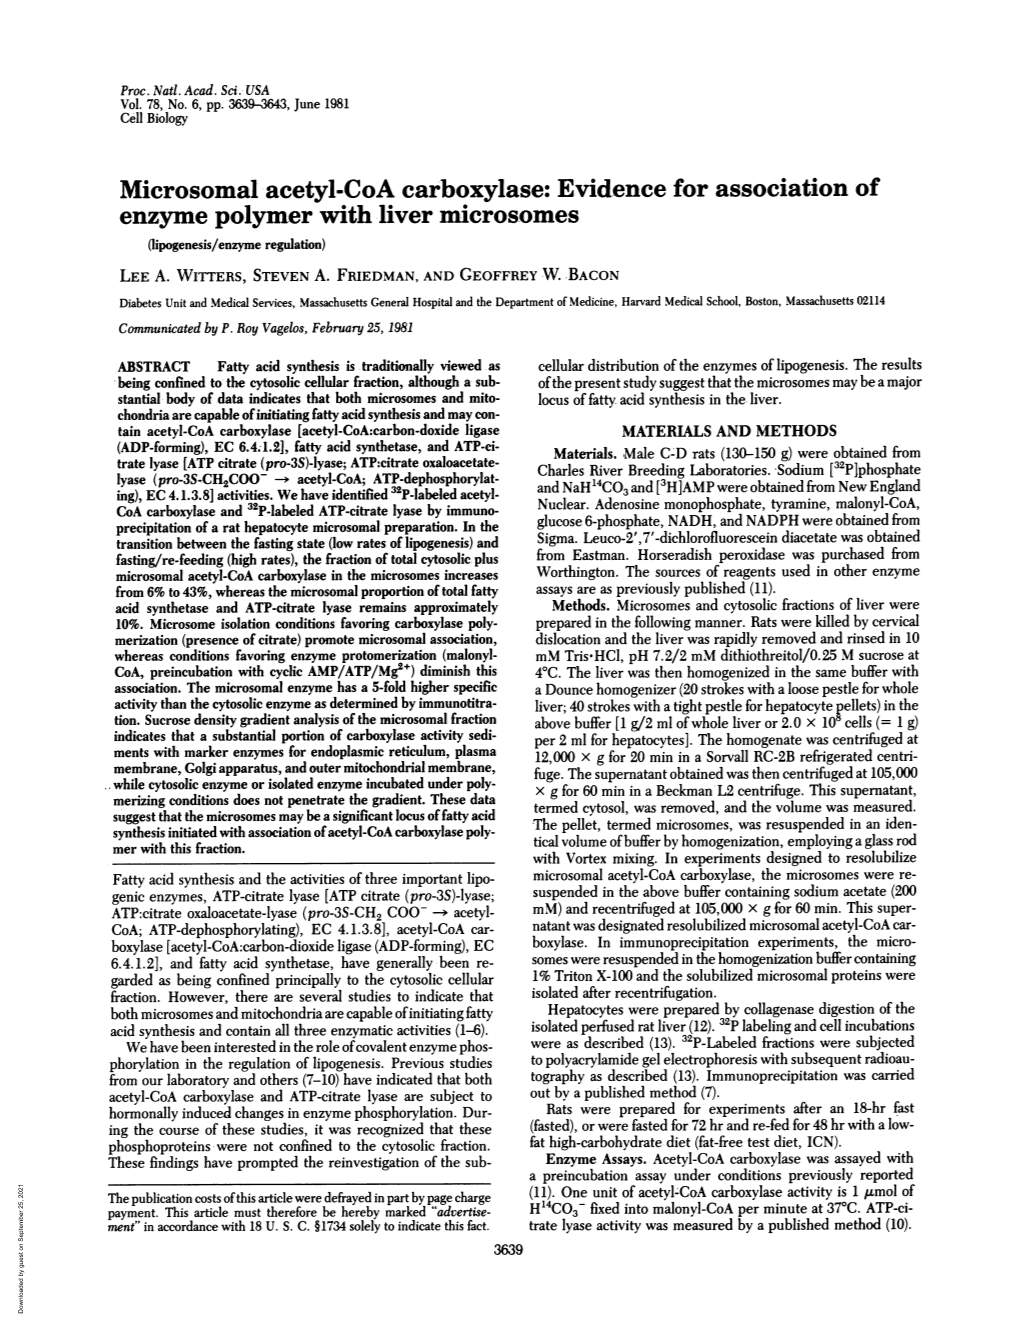 Evidence for Association of Enzyme Polymer with Liver Microsomes (Lipogenesis/Enzyme Regulation) LEE A